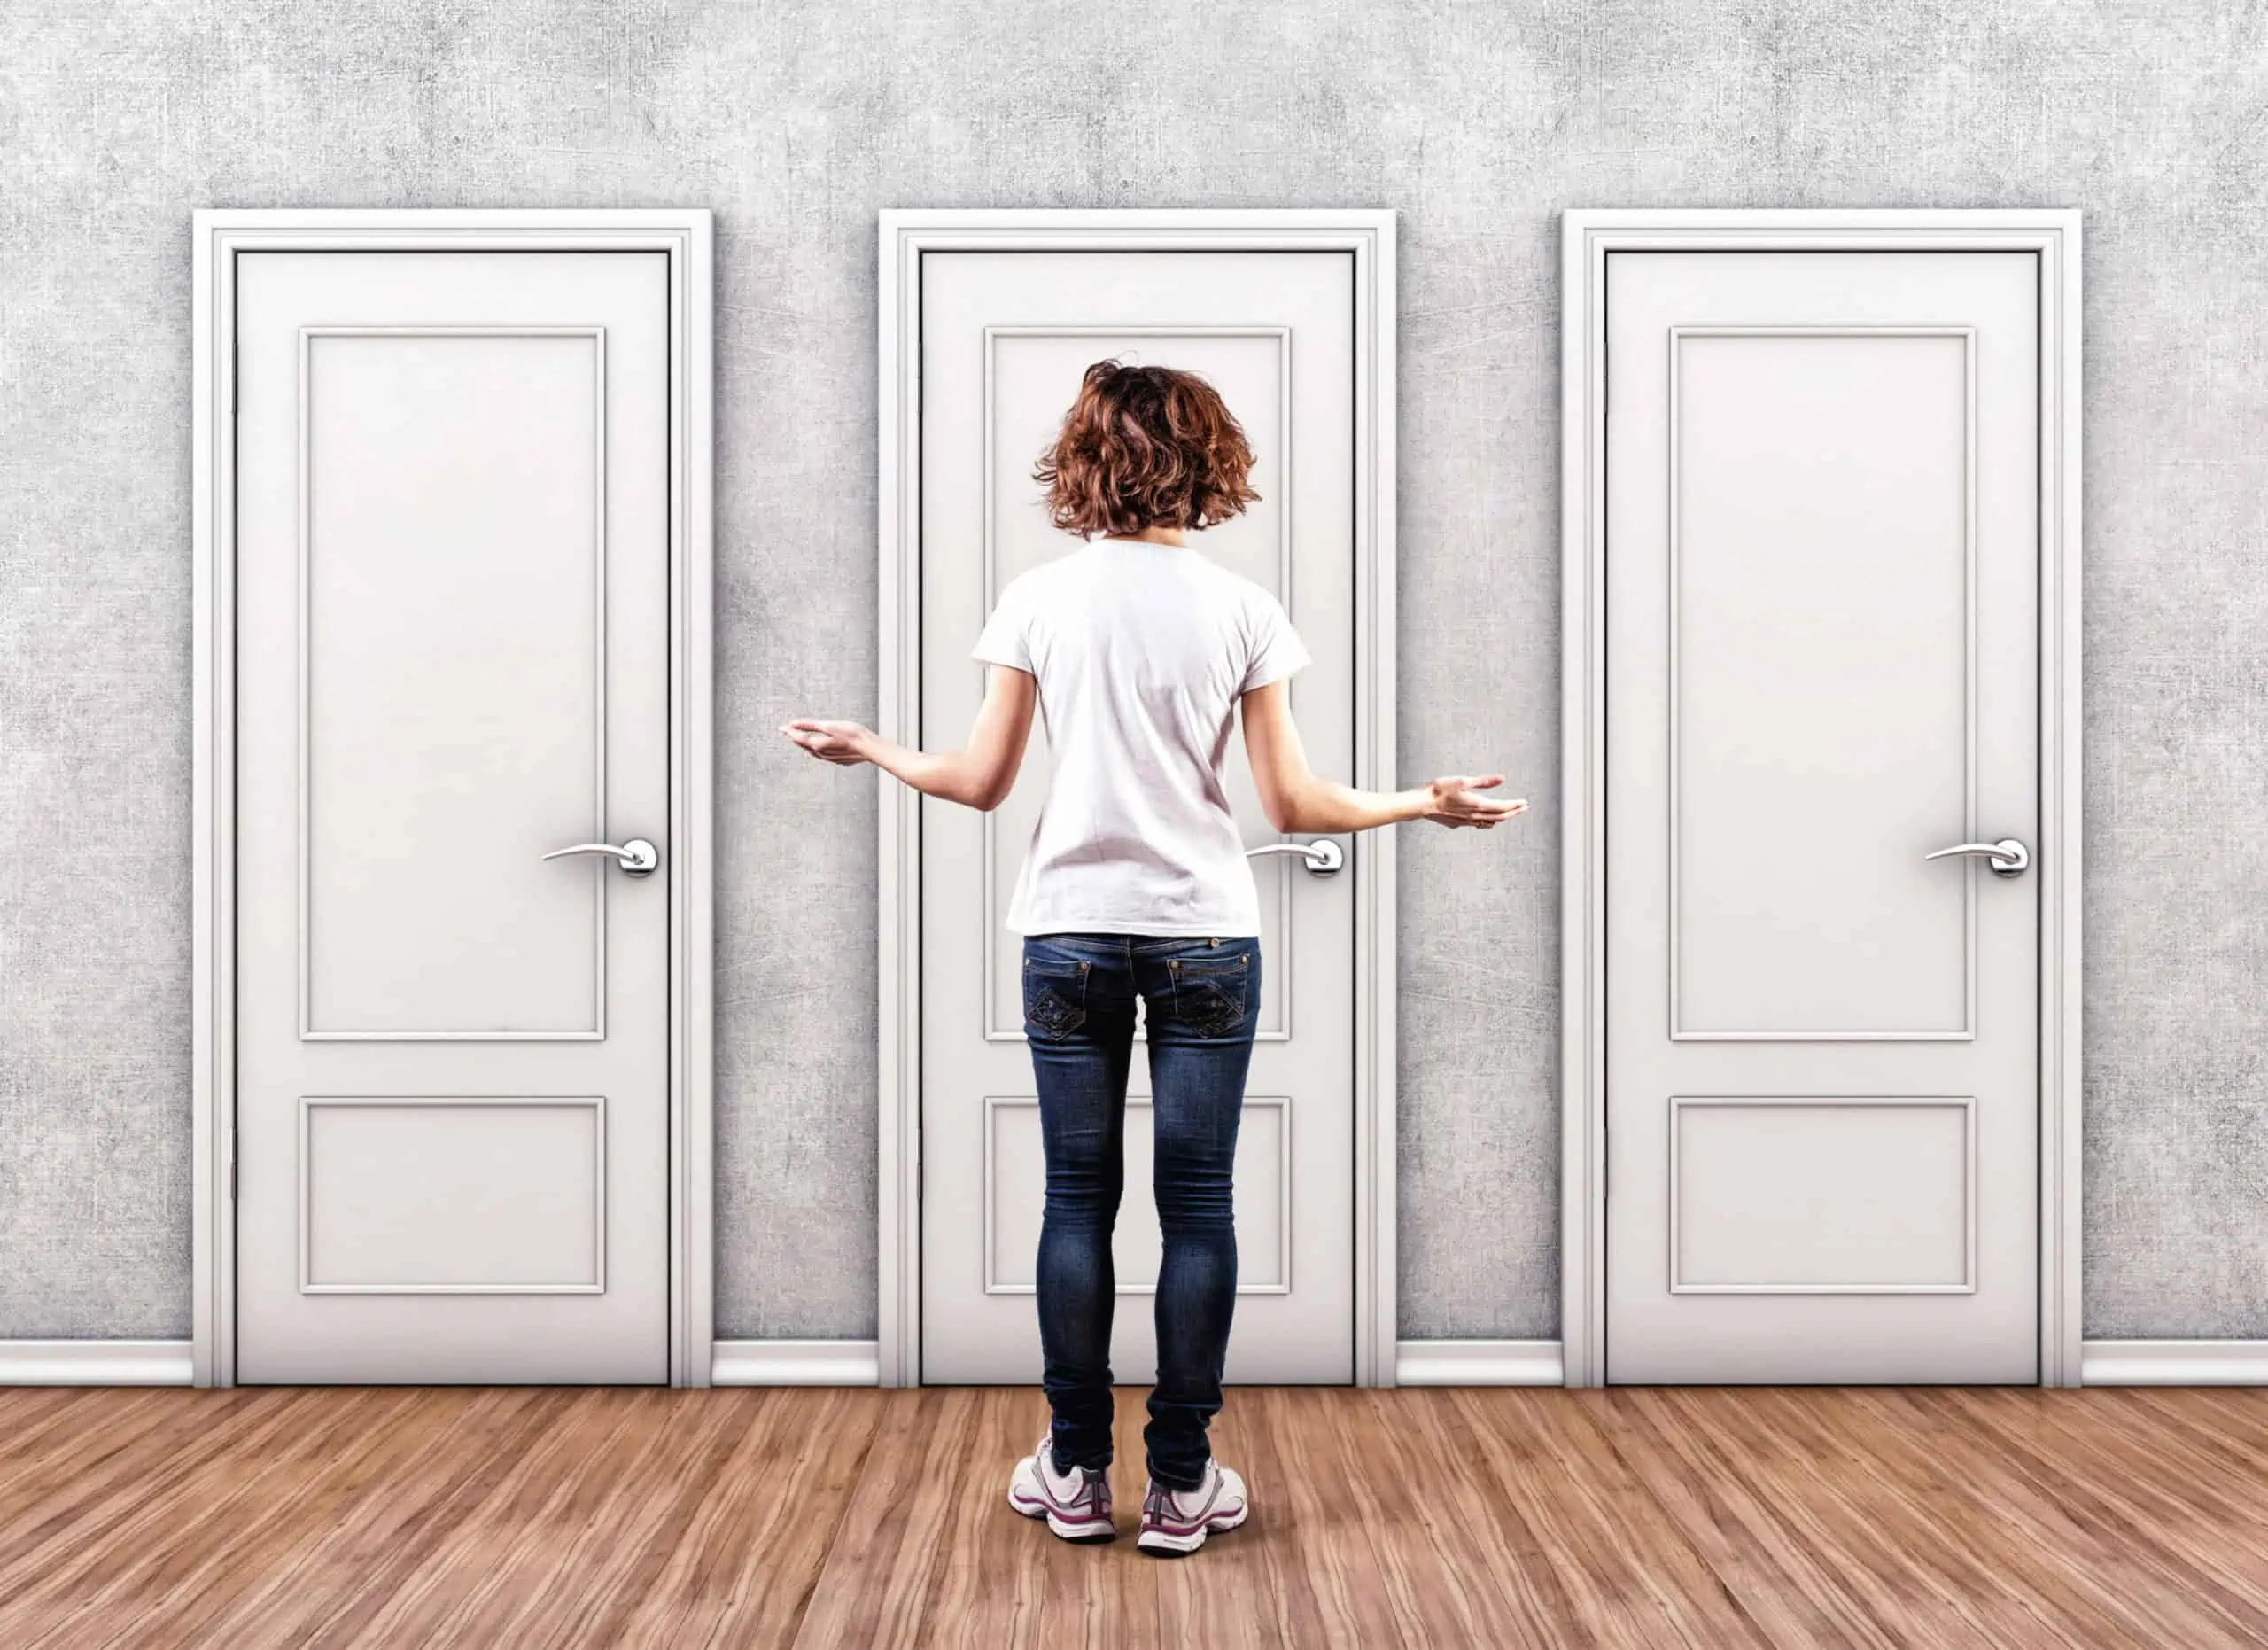 A redheaded Caucasian woman in dark blue denim jeans and a white t-shirt standing in front of multiple doors deciding how to file taxes.